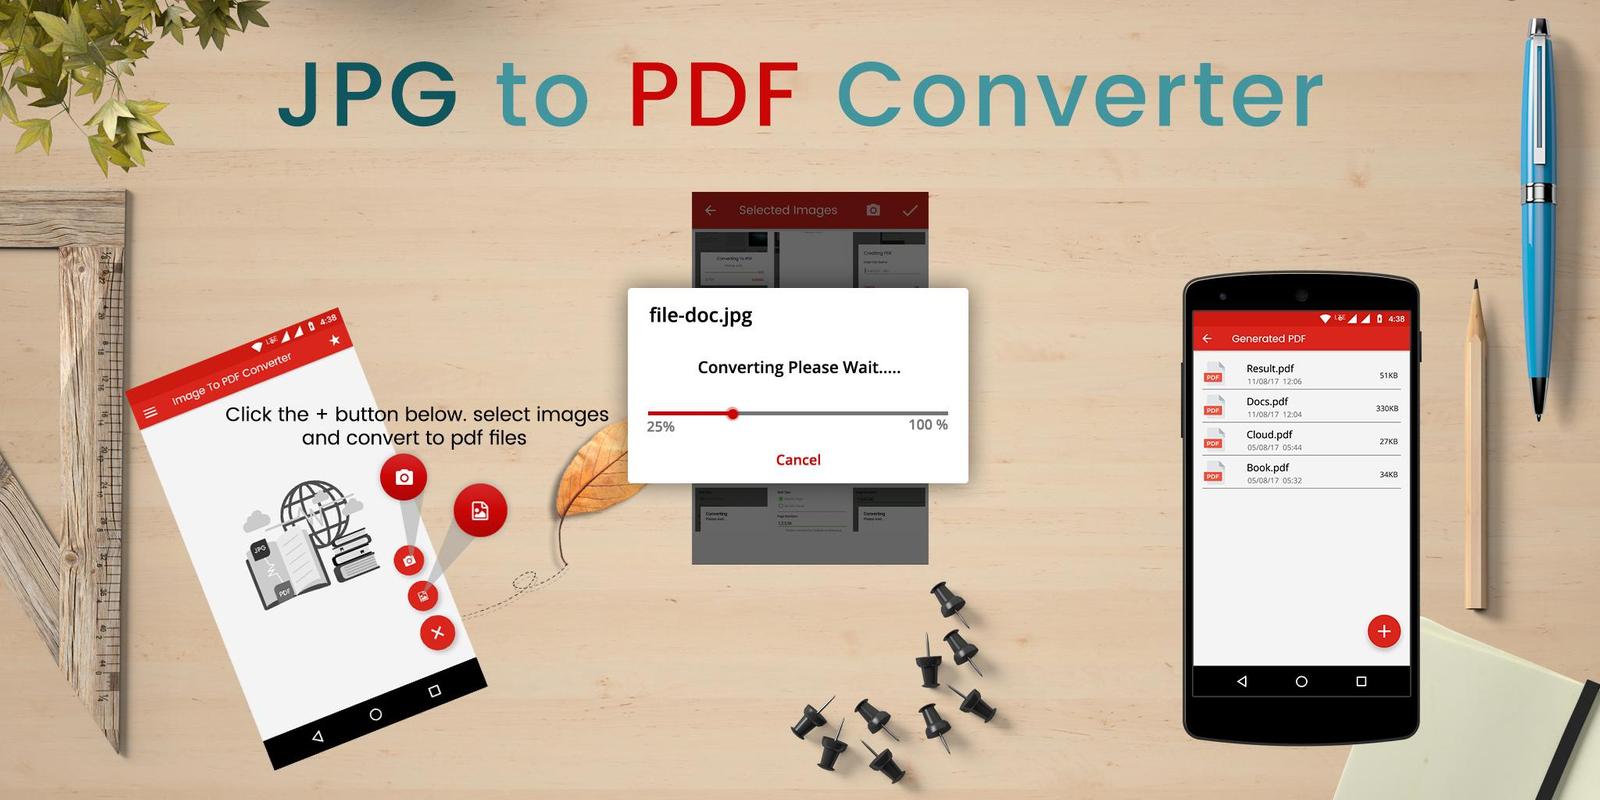 jpg to pdf converter freeware from browser